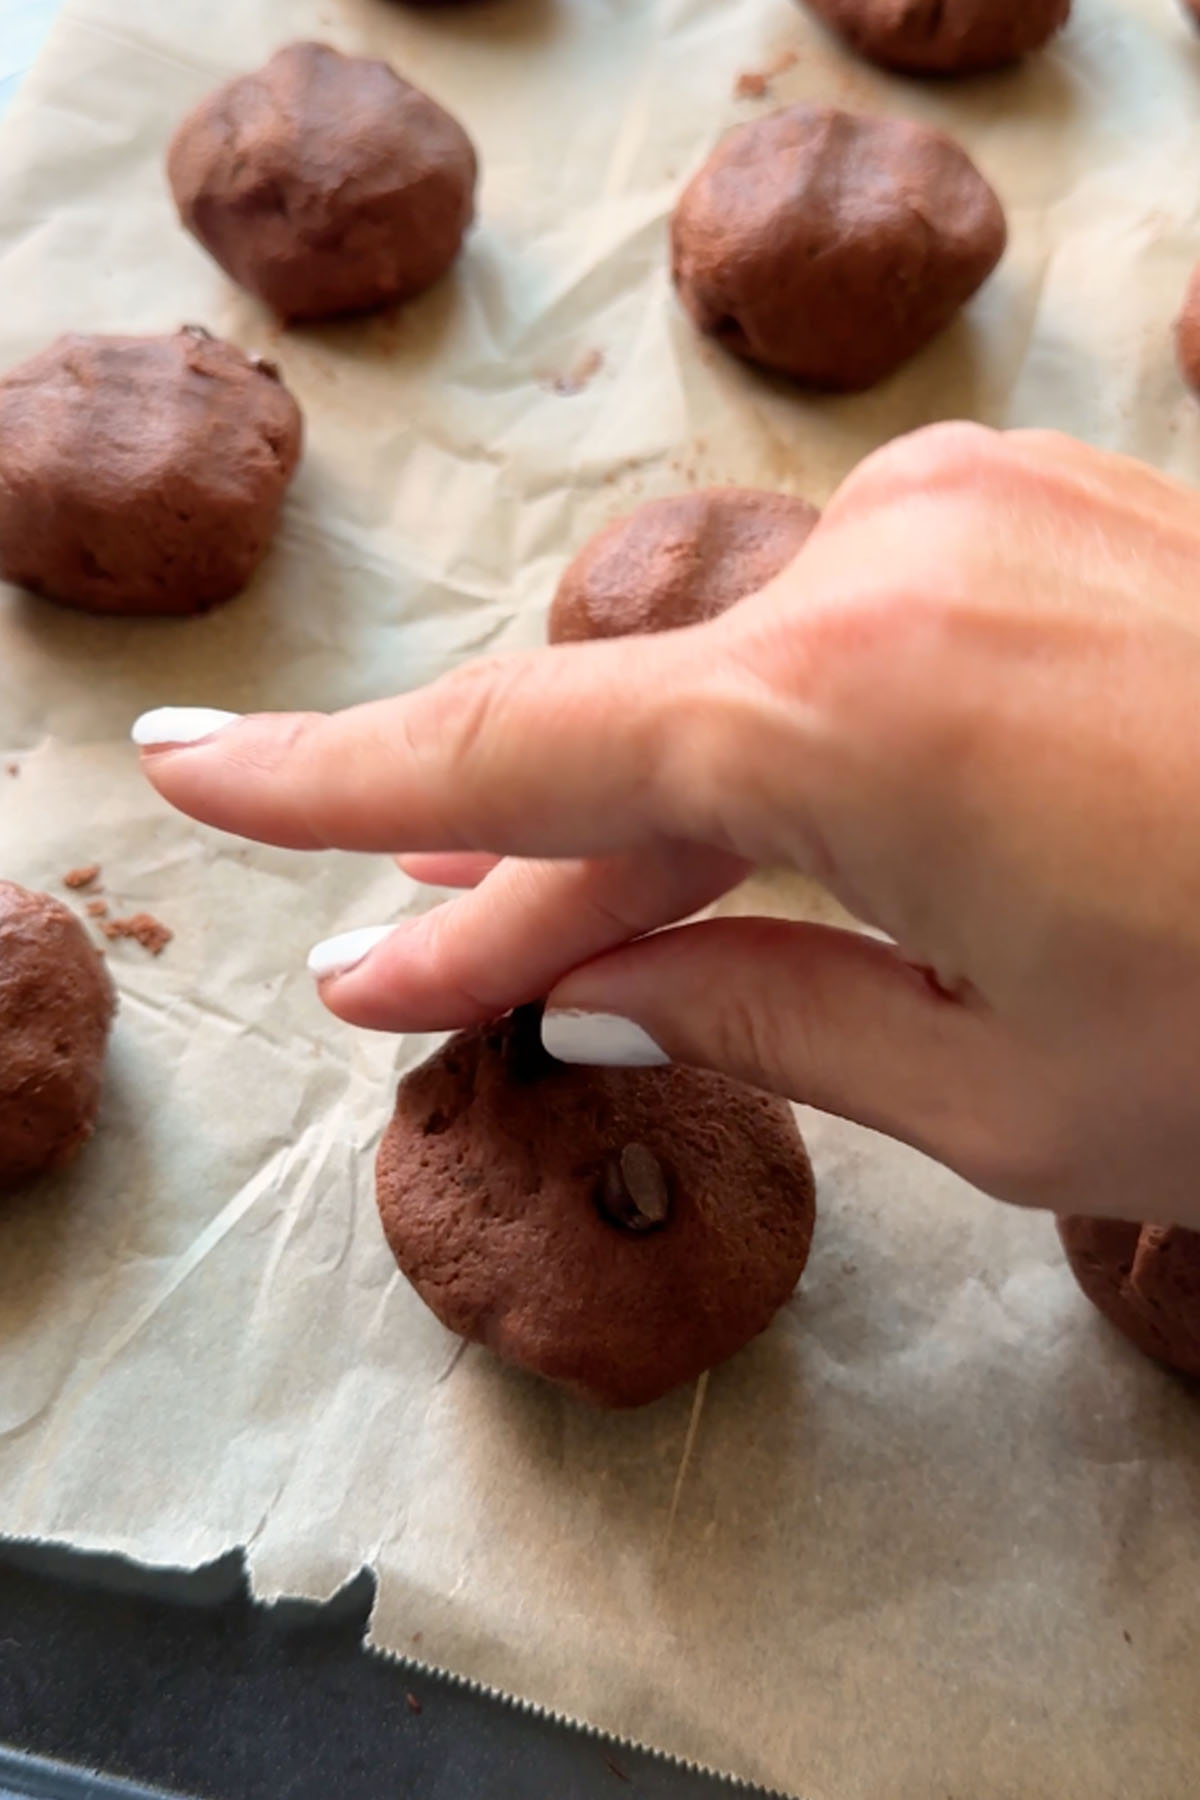 Chocolate chips are pressed into the top of a chocolate cookie dough ball.